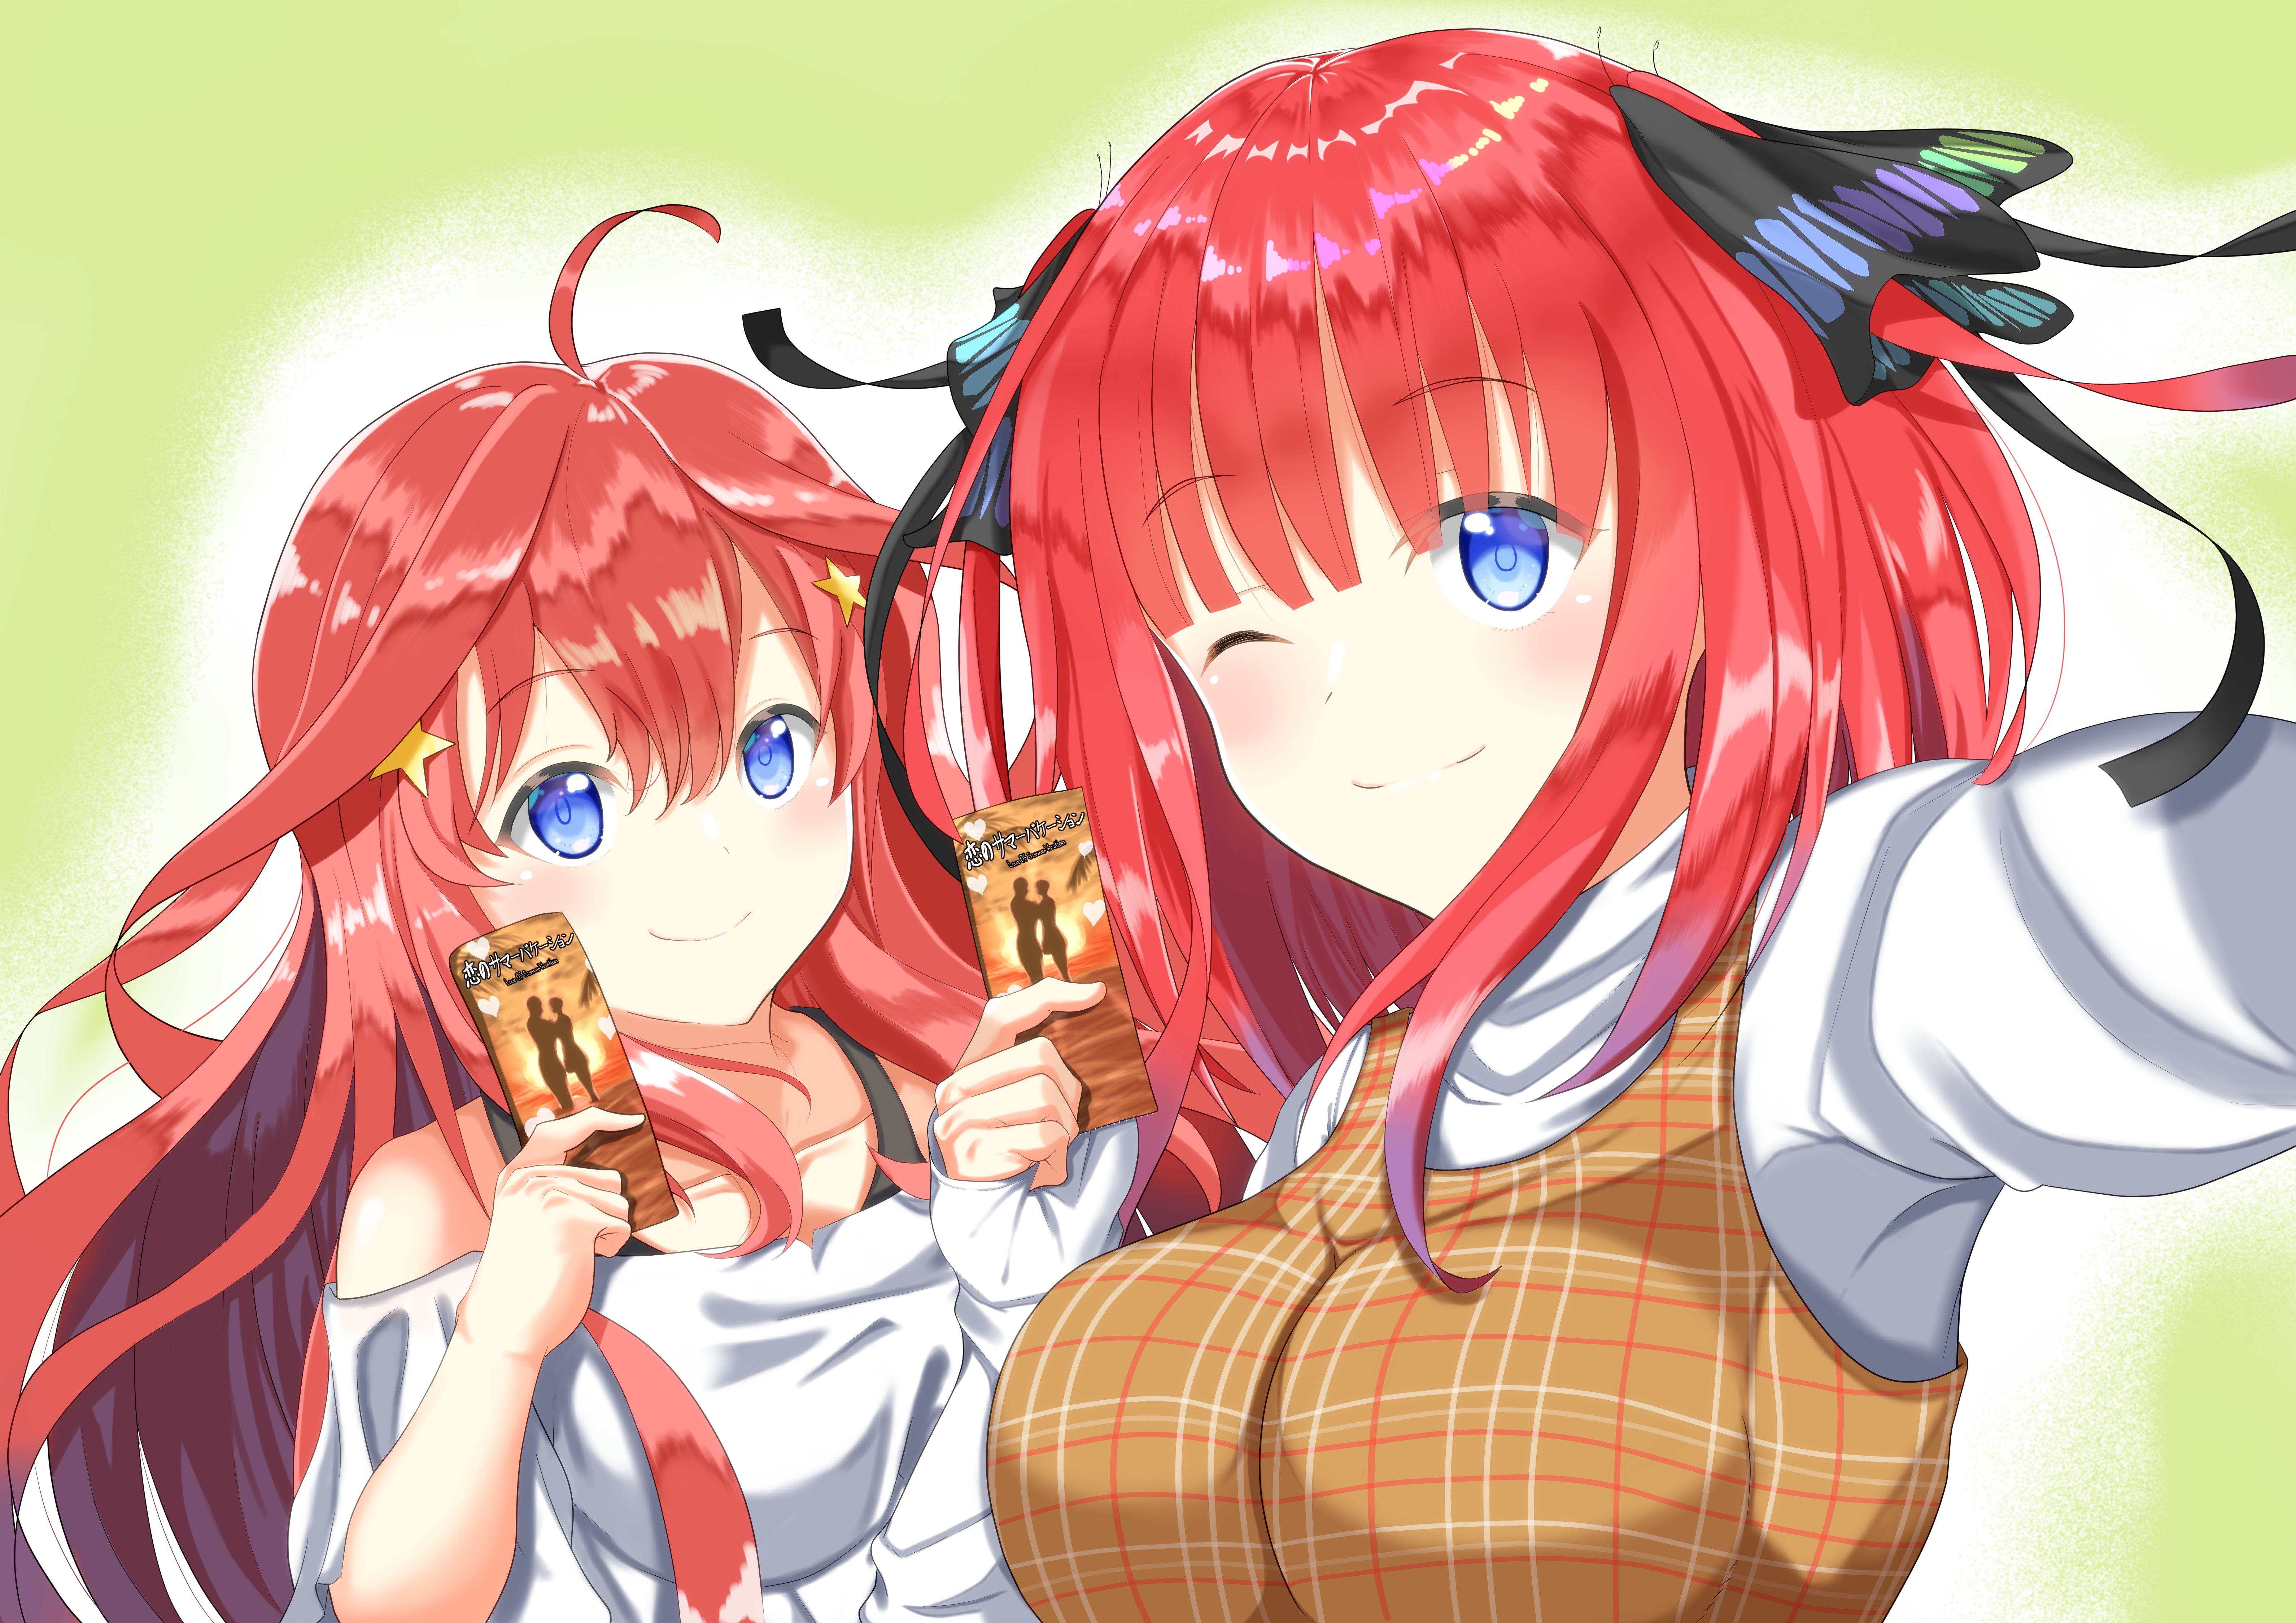 The Quintessential Quintuplets 4k Ultra HD Wallpaper by カルタ